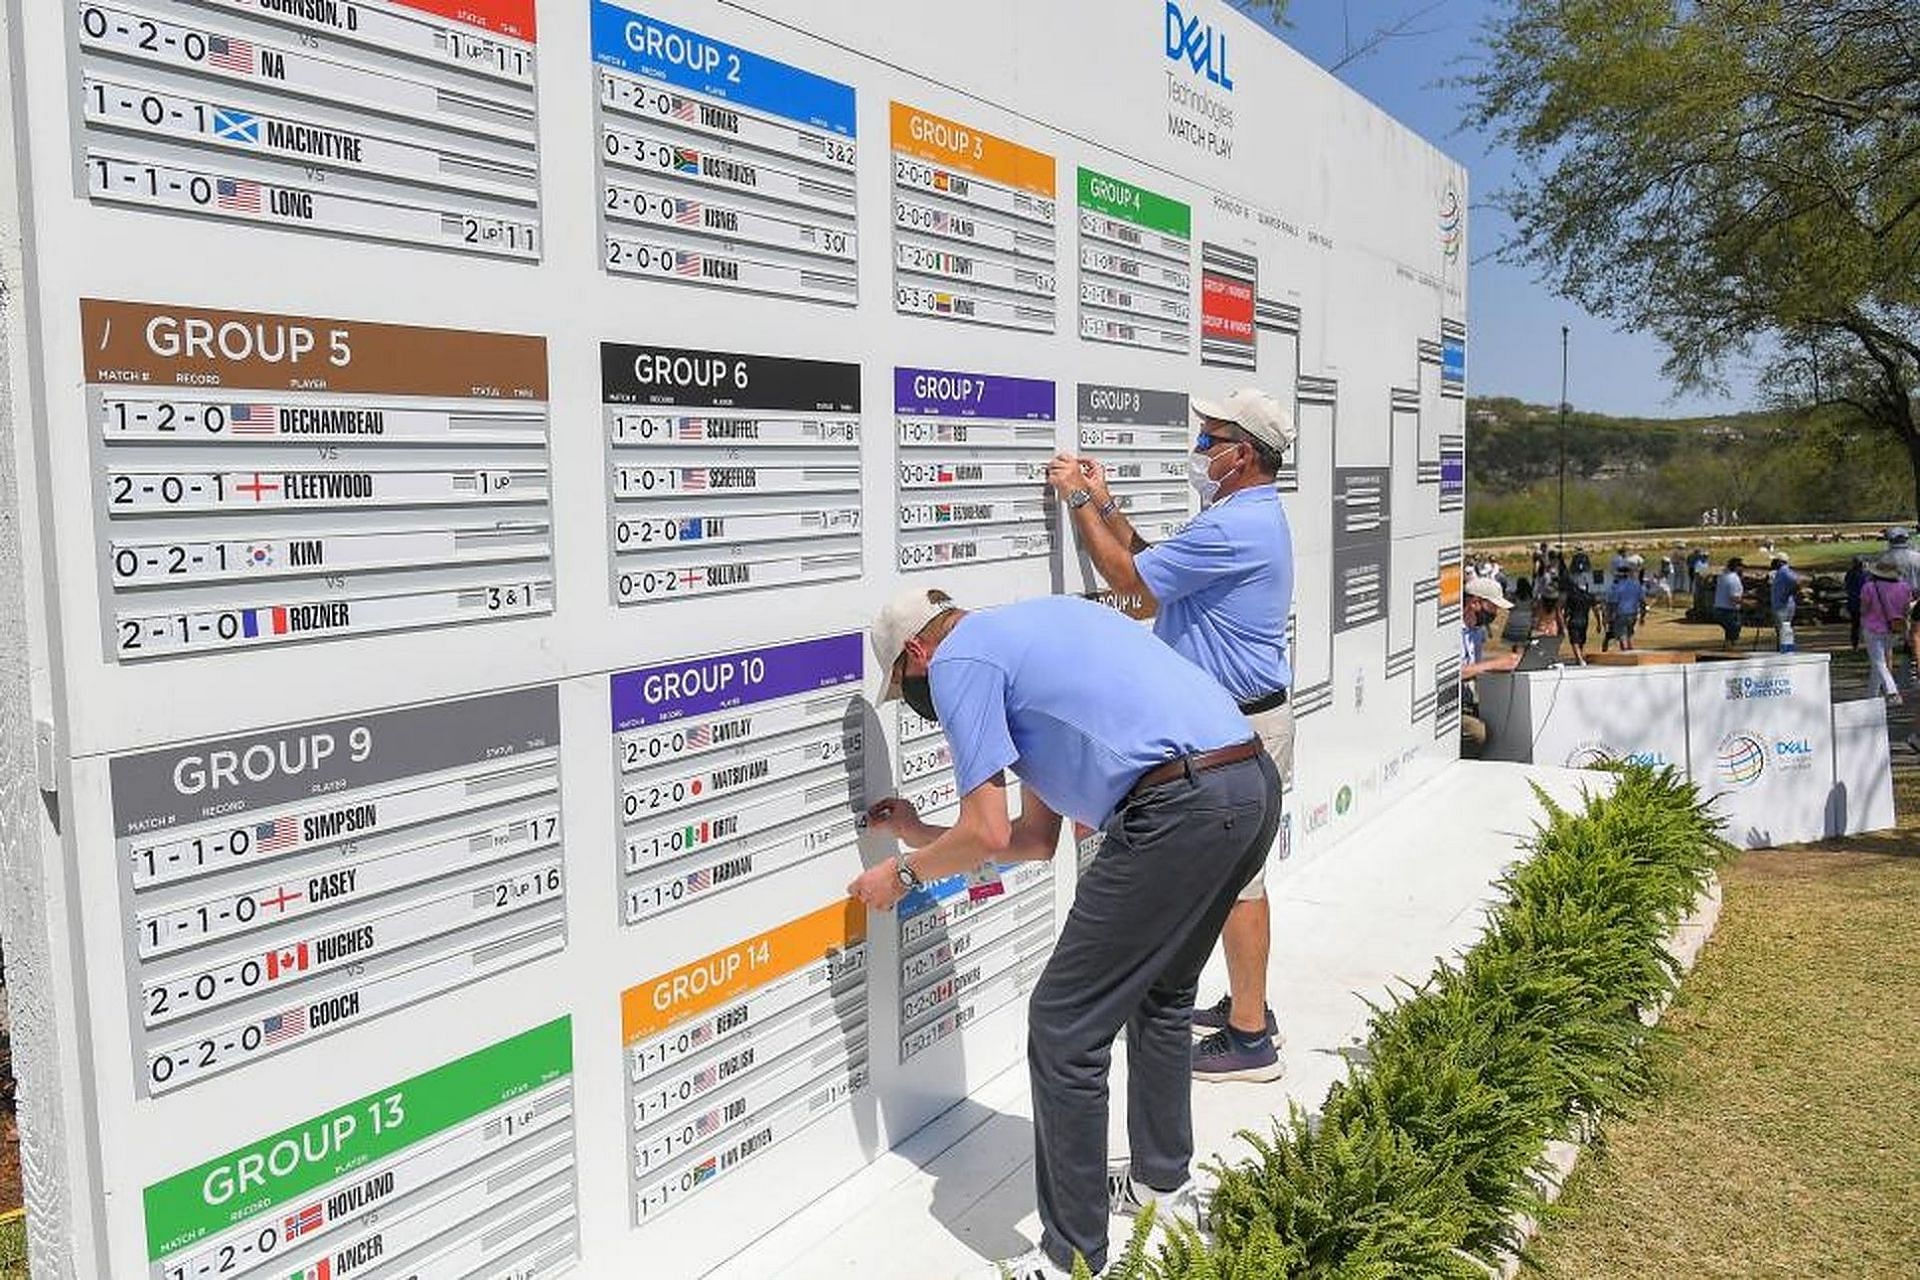 Photo: pga tour wgc dell match play leaderboard